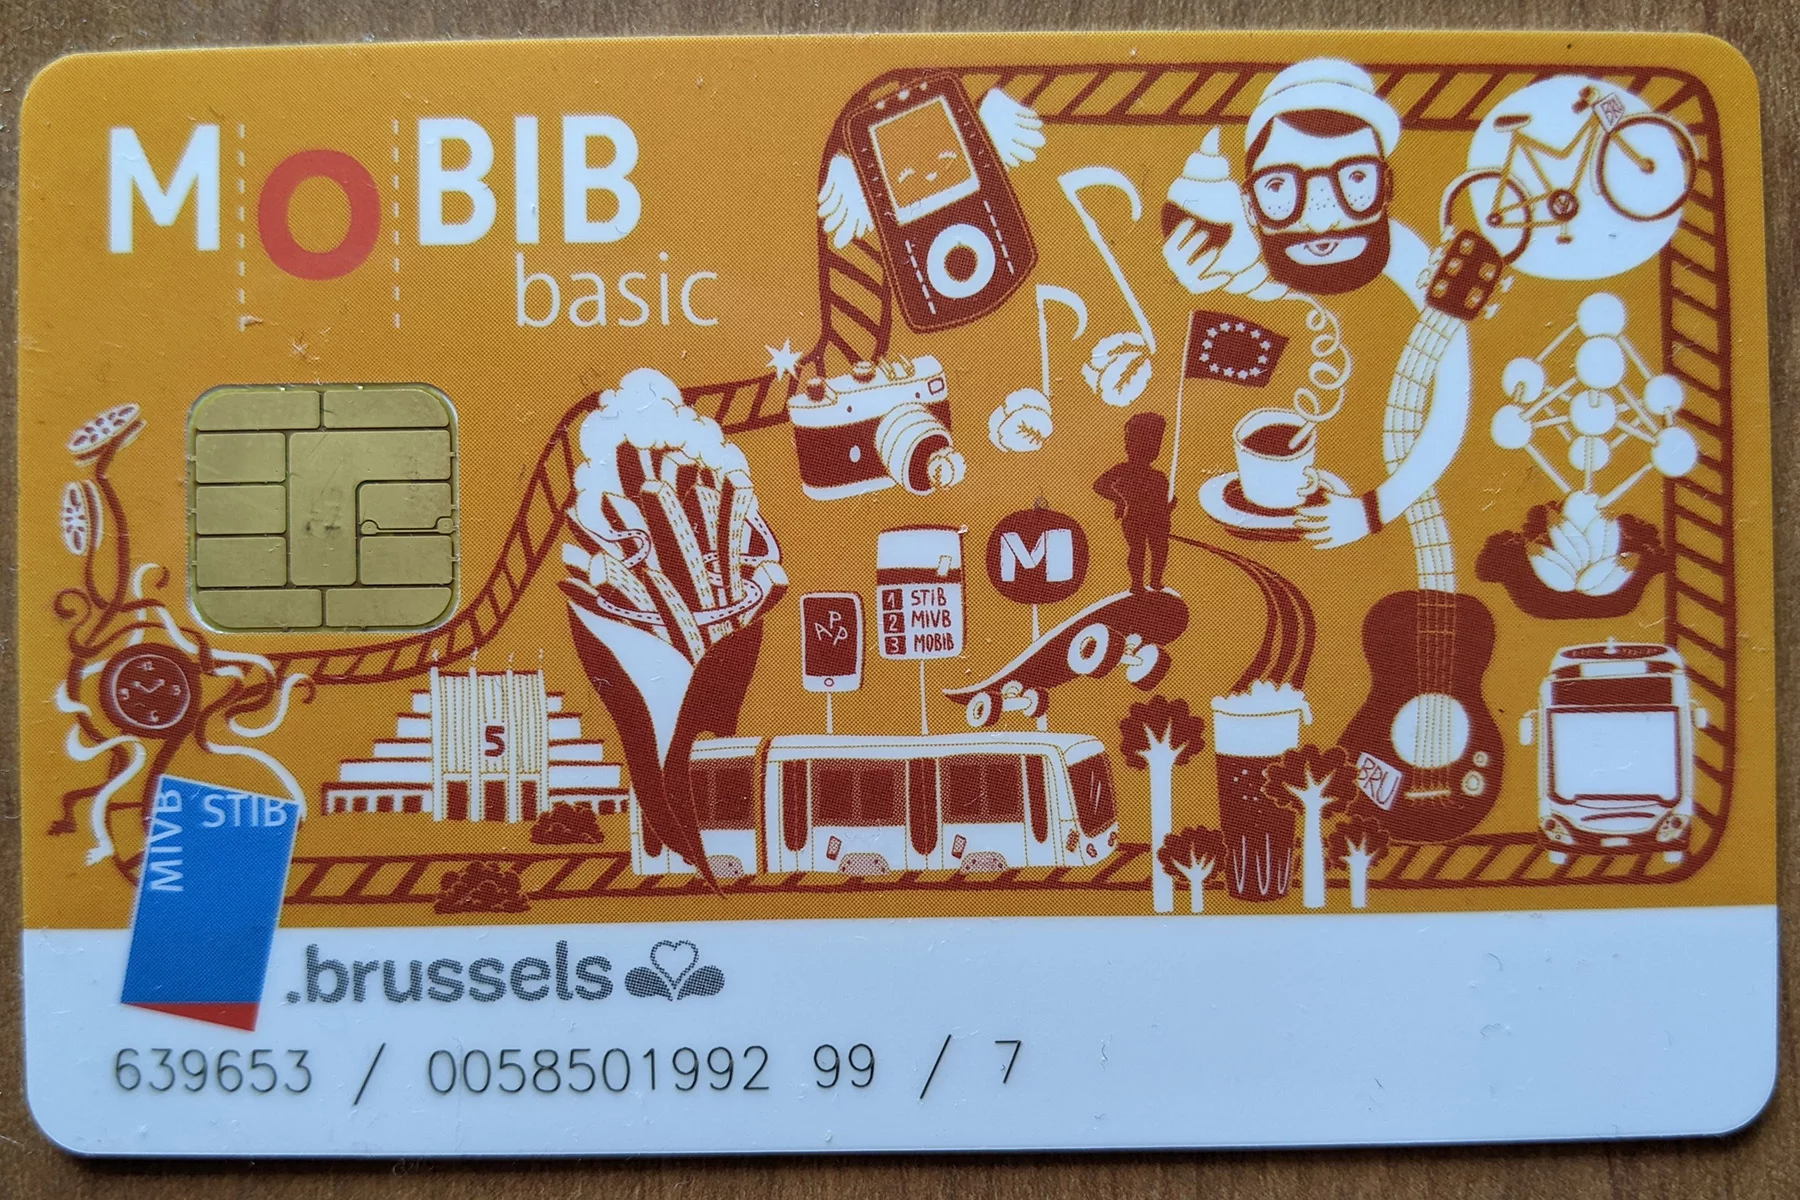 A MoBIB Basic card issued in Brussels